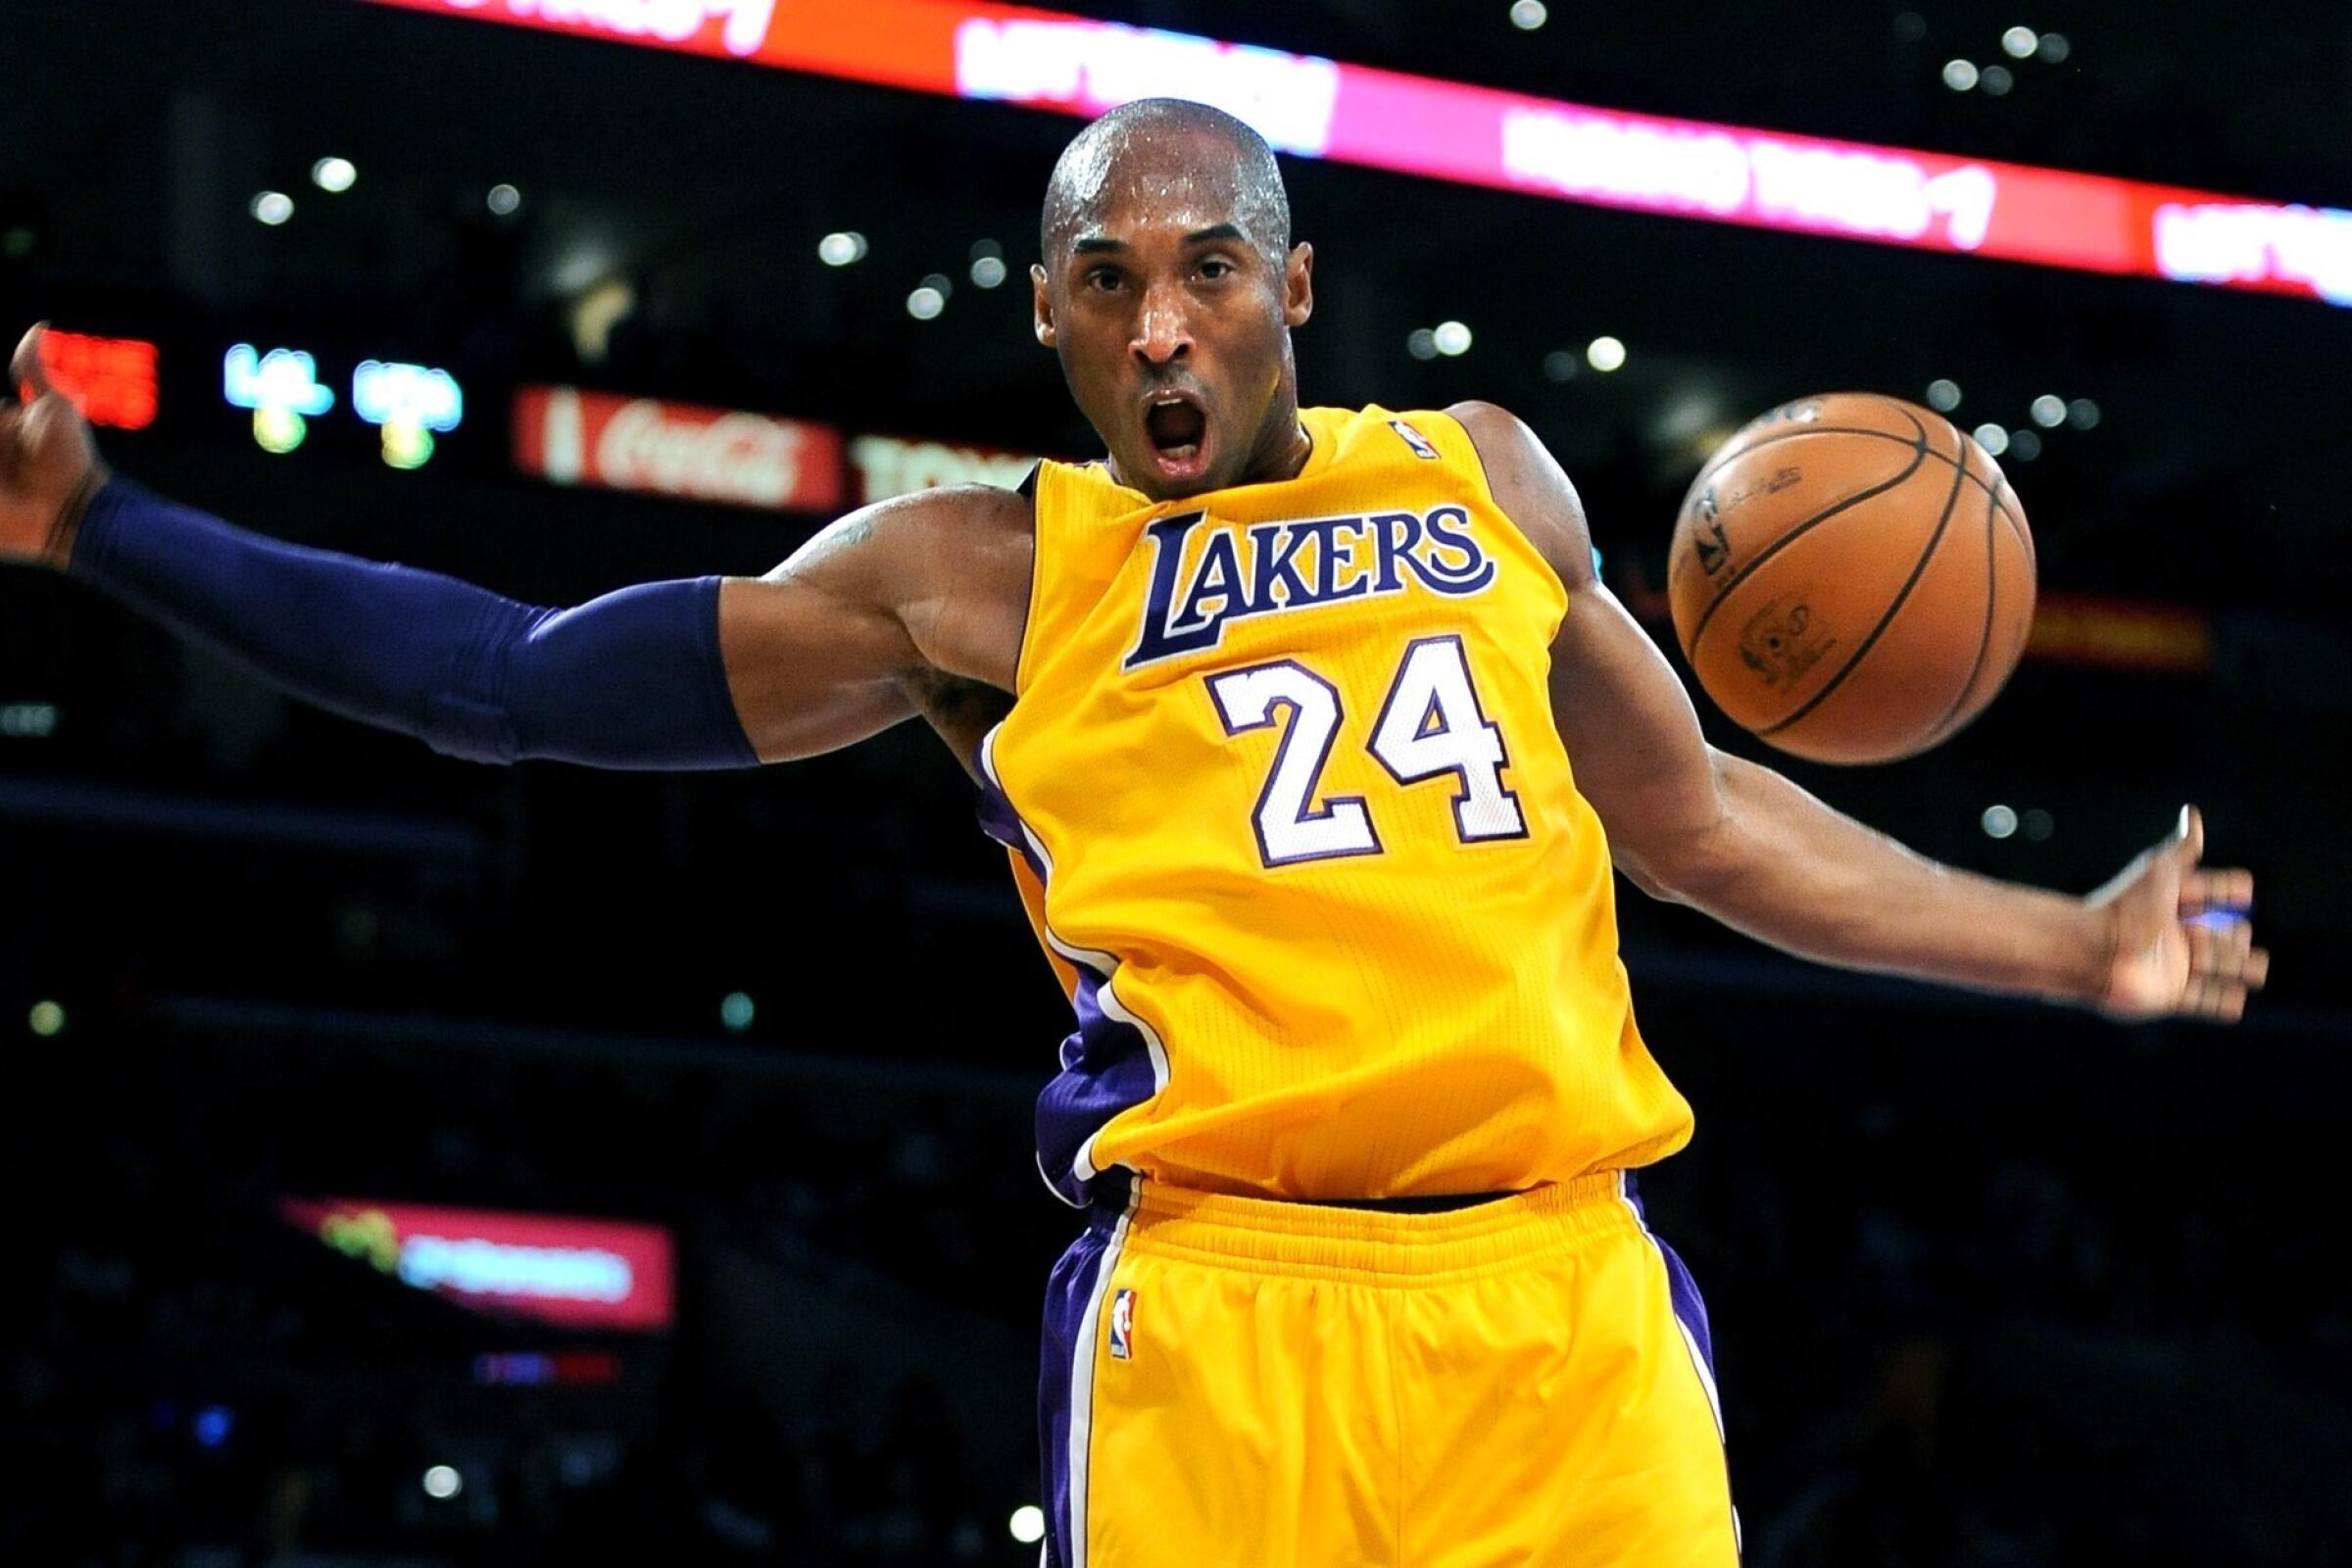 Kobe Bryant dunks during a game in 2012.